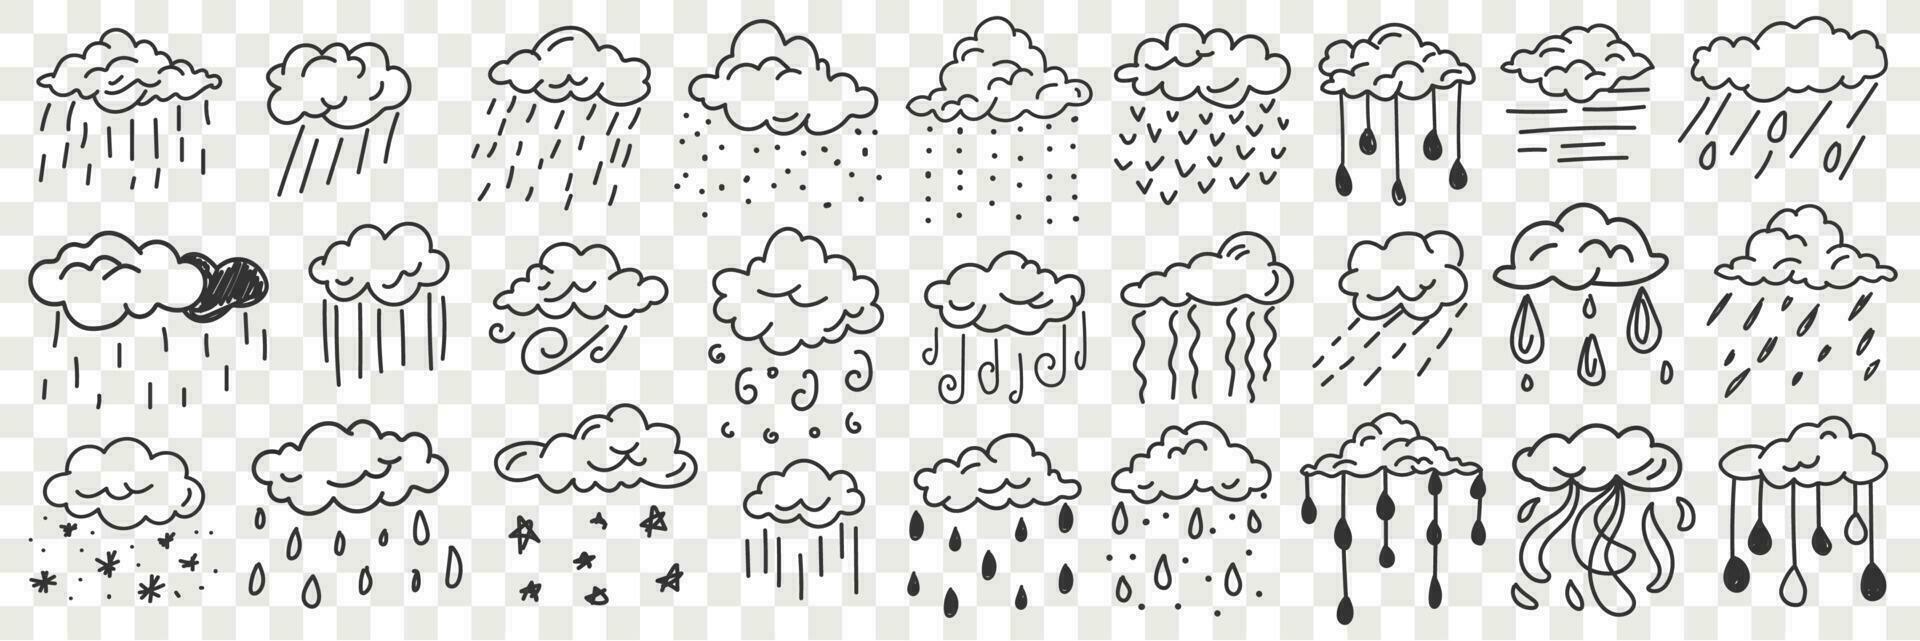 Natural falling precipitation doodle set. Collection of hand drawn various natural disasters rain snow falling from clouds in rows isolated on transparent vector